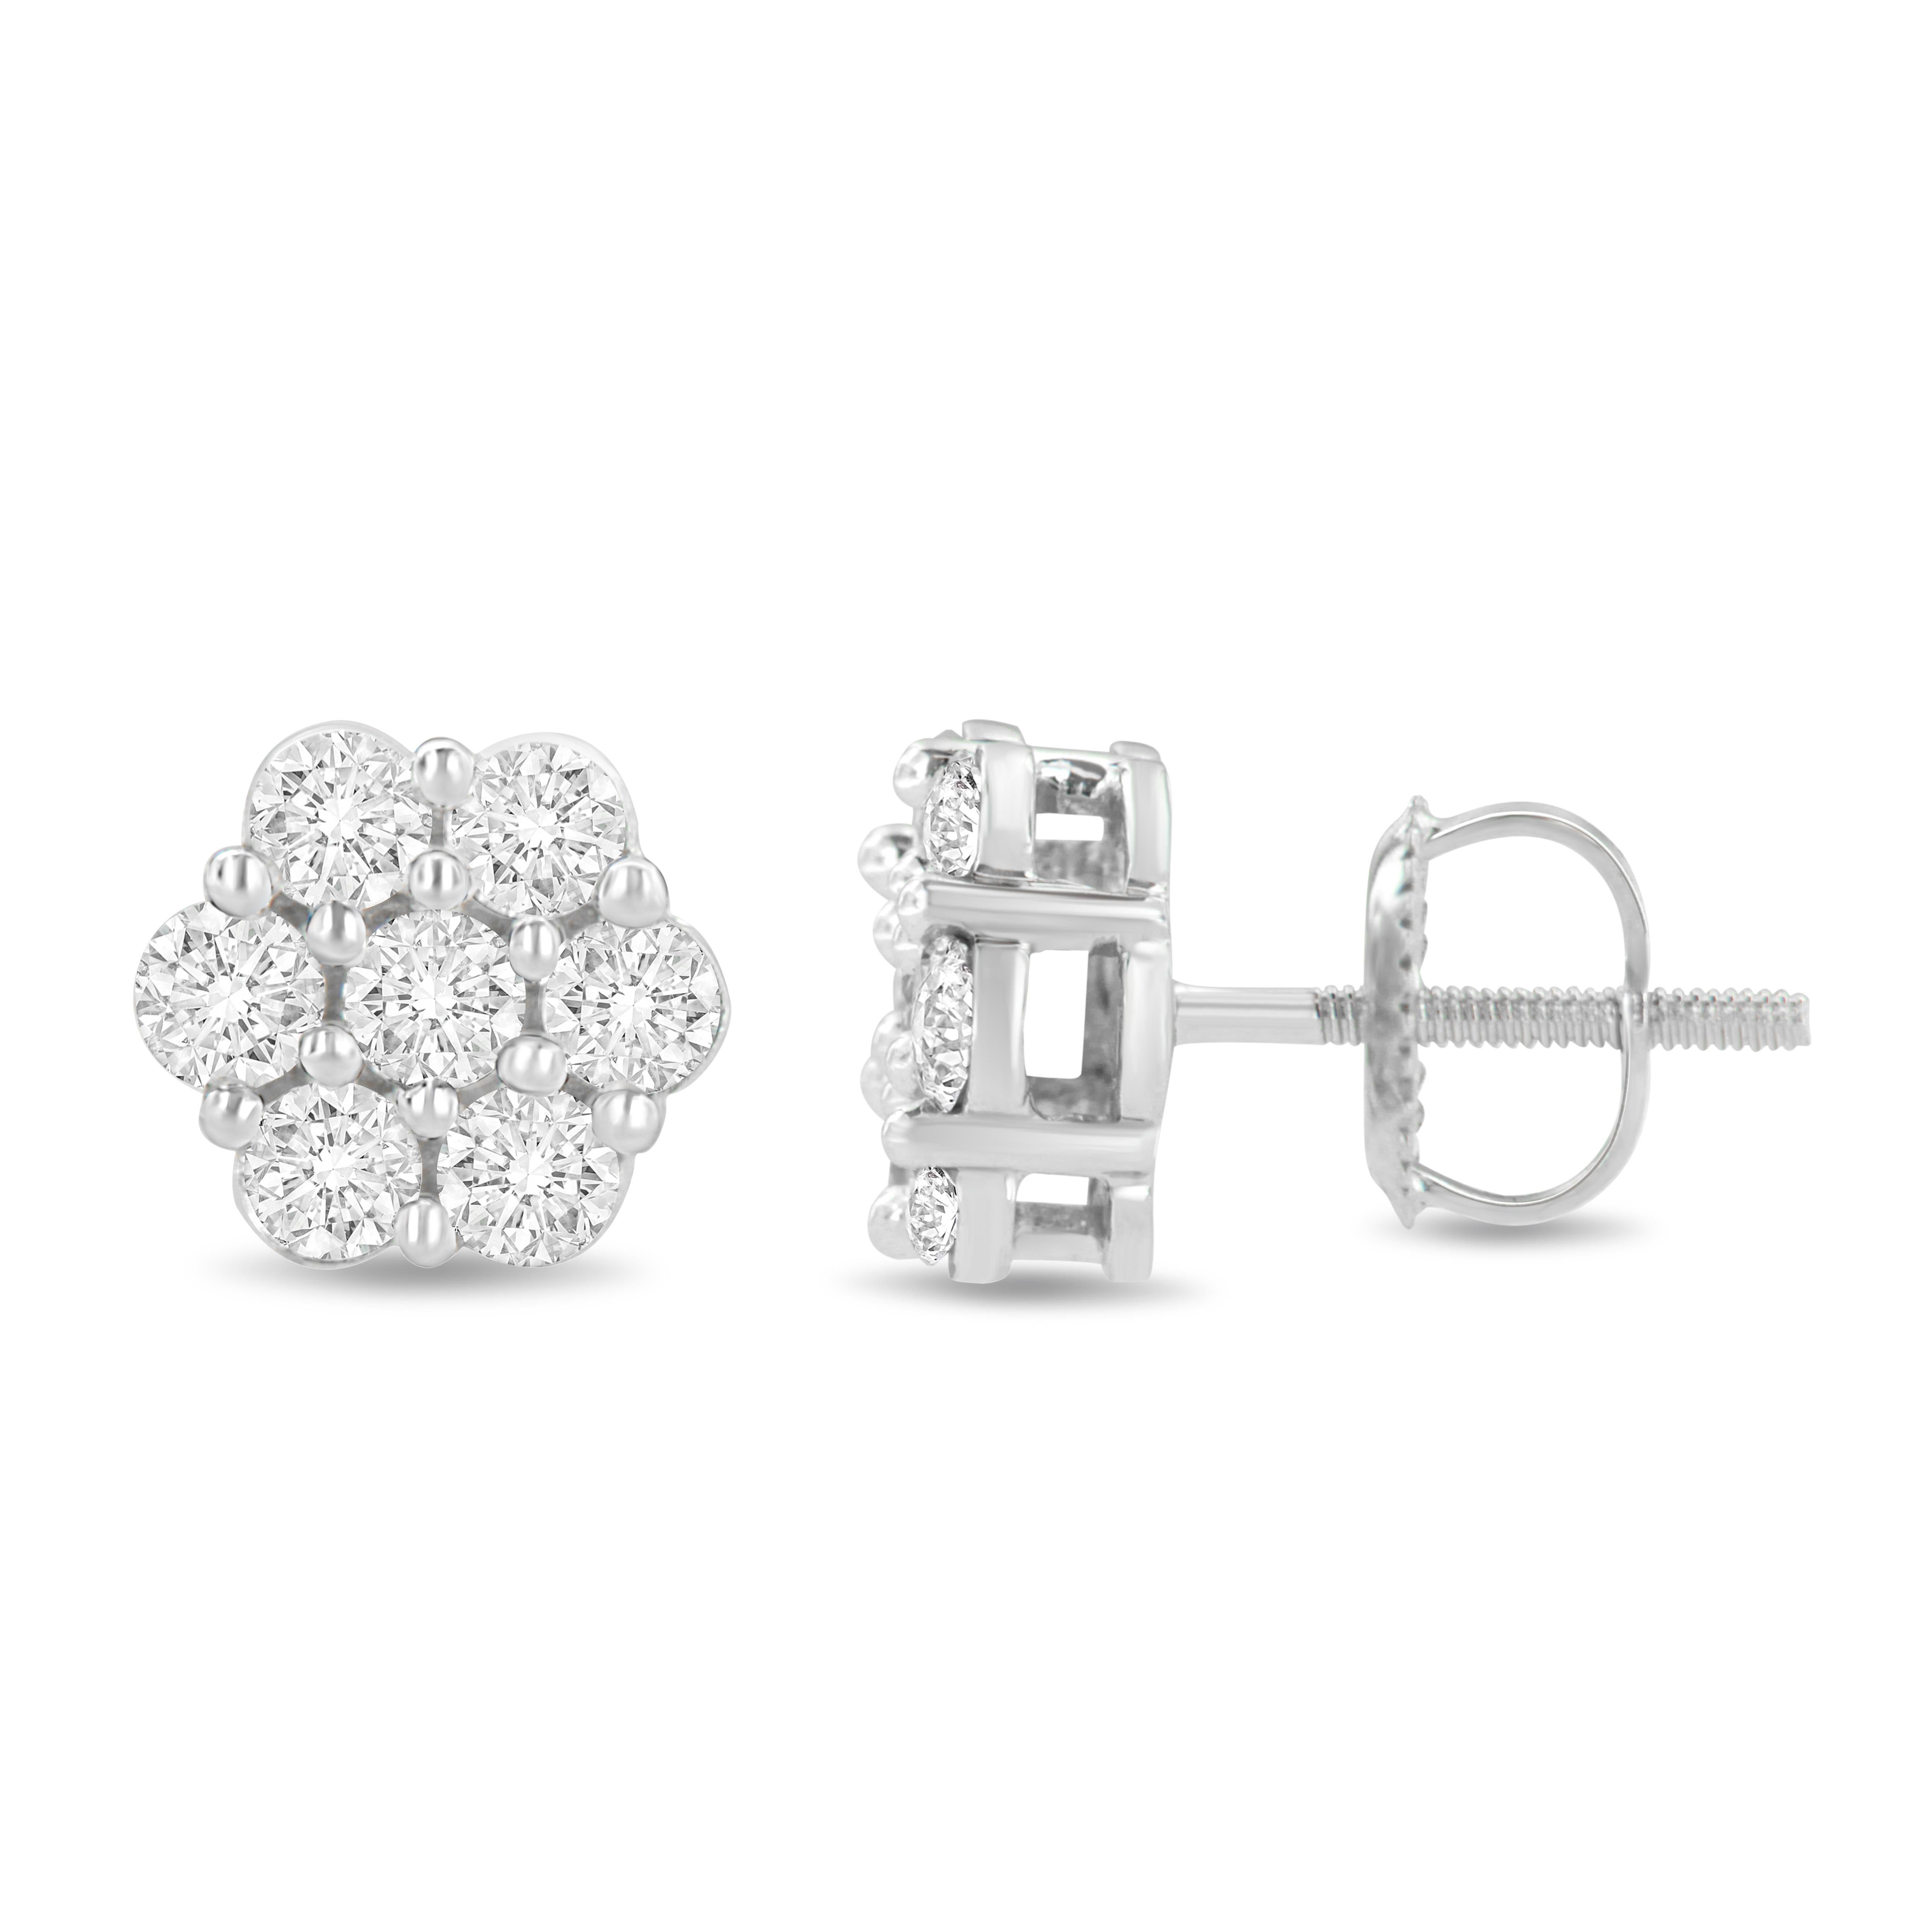 You will fall in love with these classic cluster stud earrings. A must have for any serious jewelry collection, these 14k white gold boast an impressive 1.0 carat total weight of natural diamonds with seven stones each. The earrings are floral